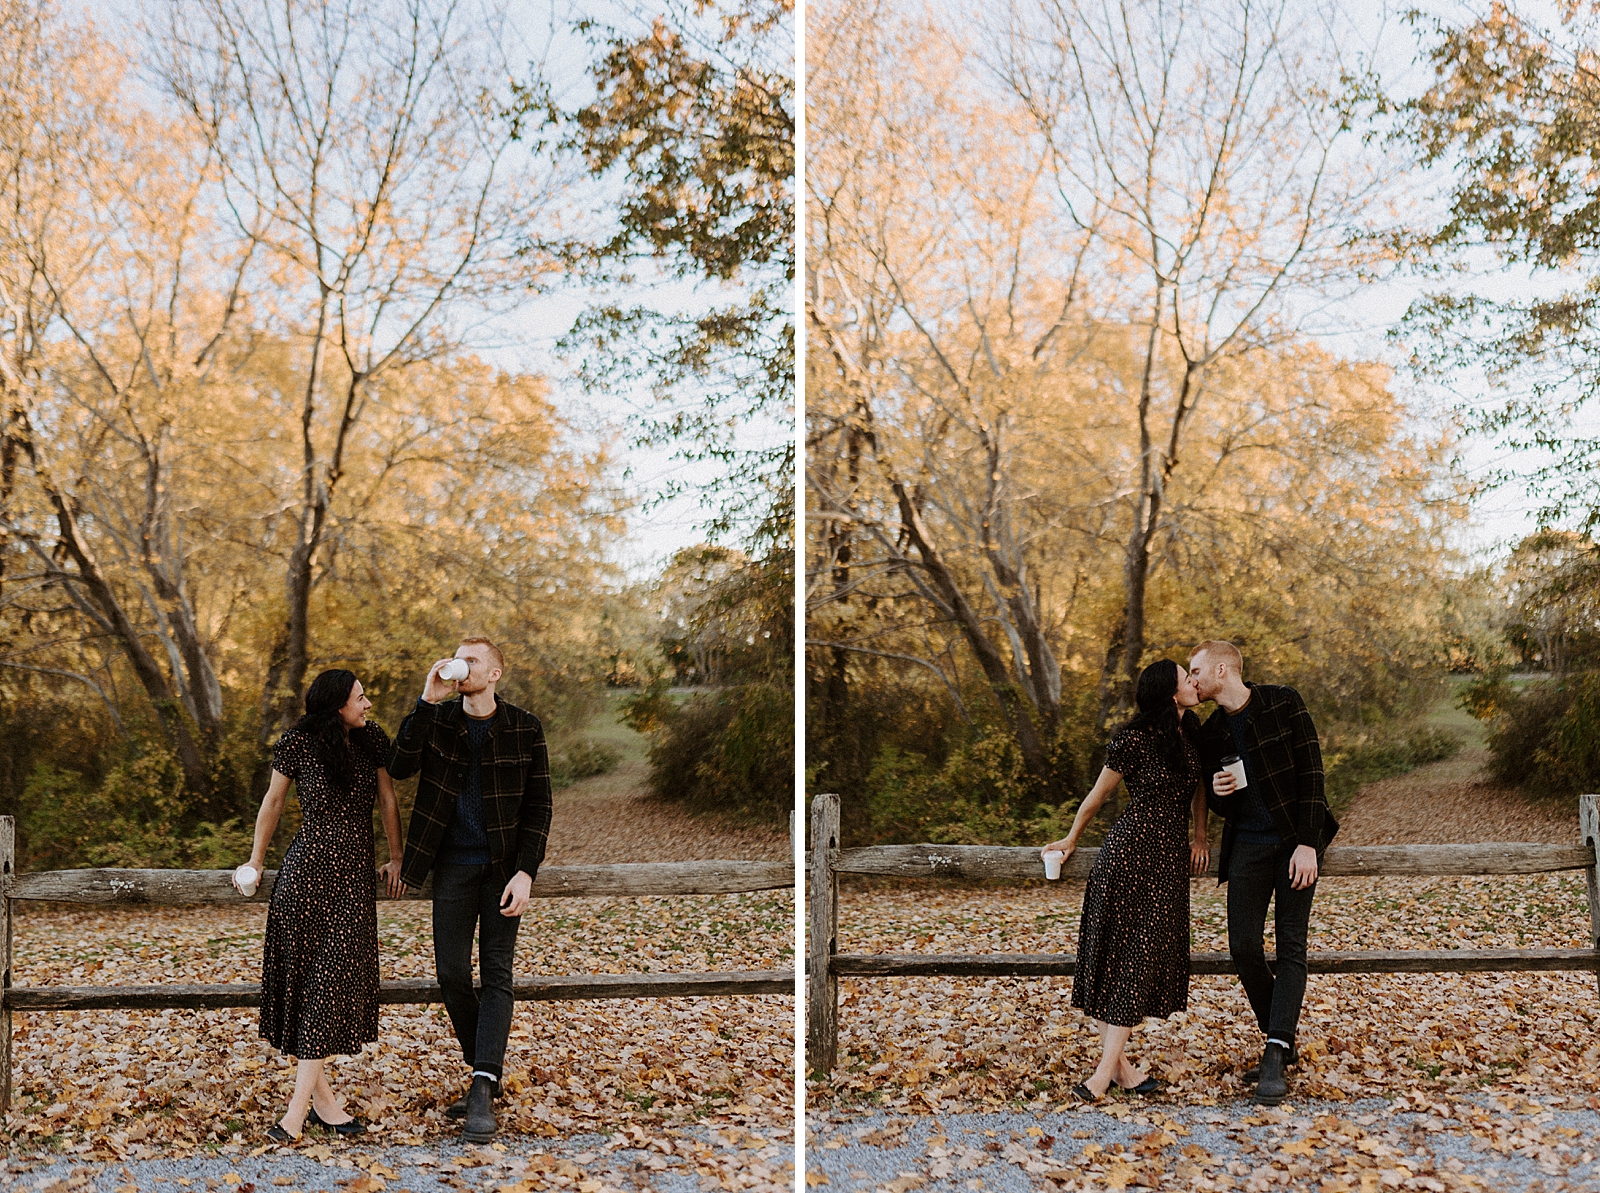 Couple leaning on simple fence with fall leafs on the ground drinking and kissing